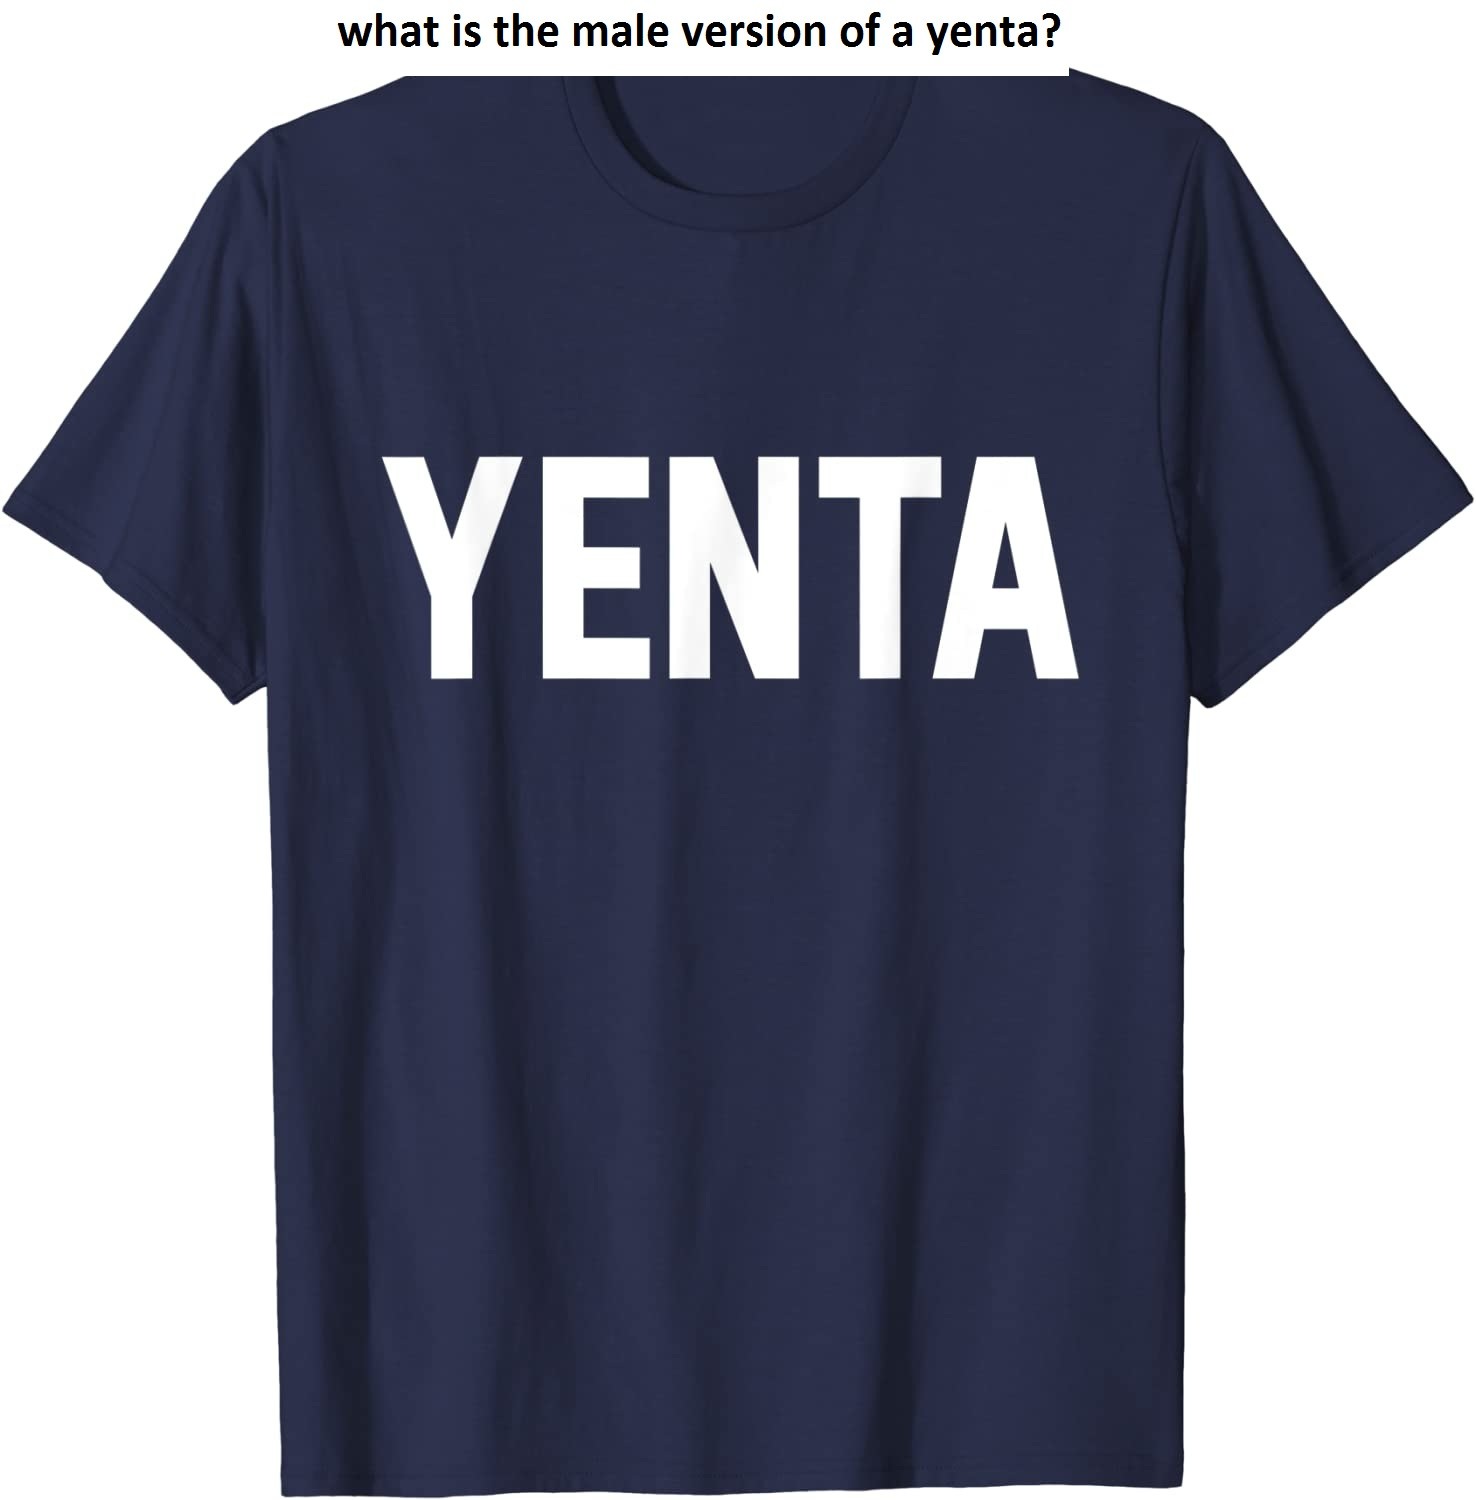 what is the male version of a yenta?